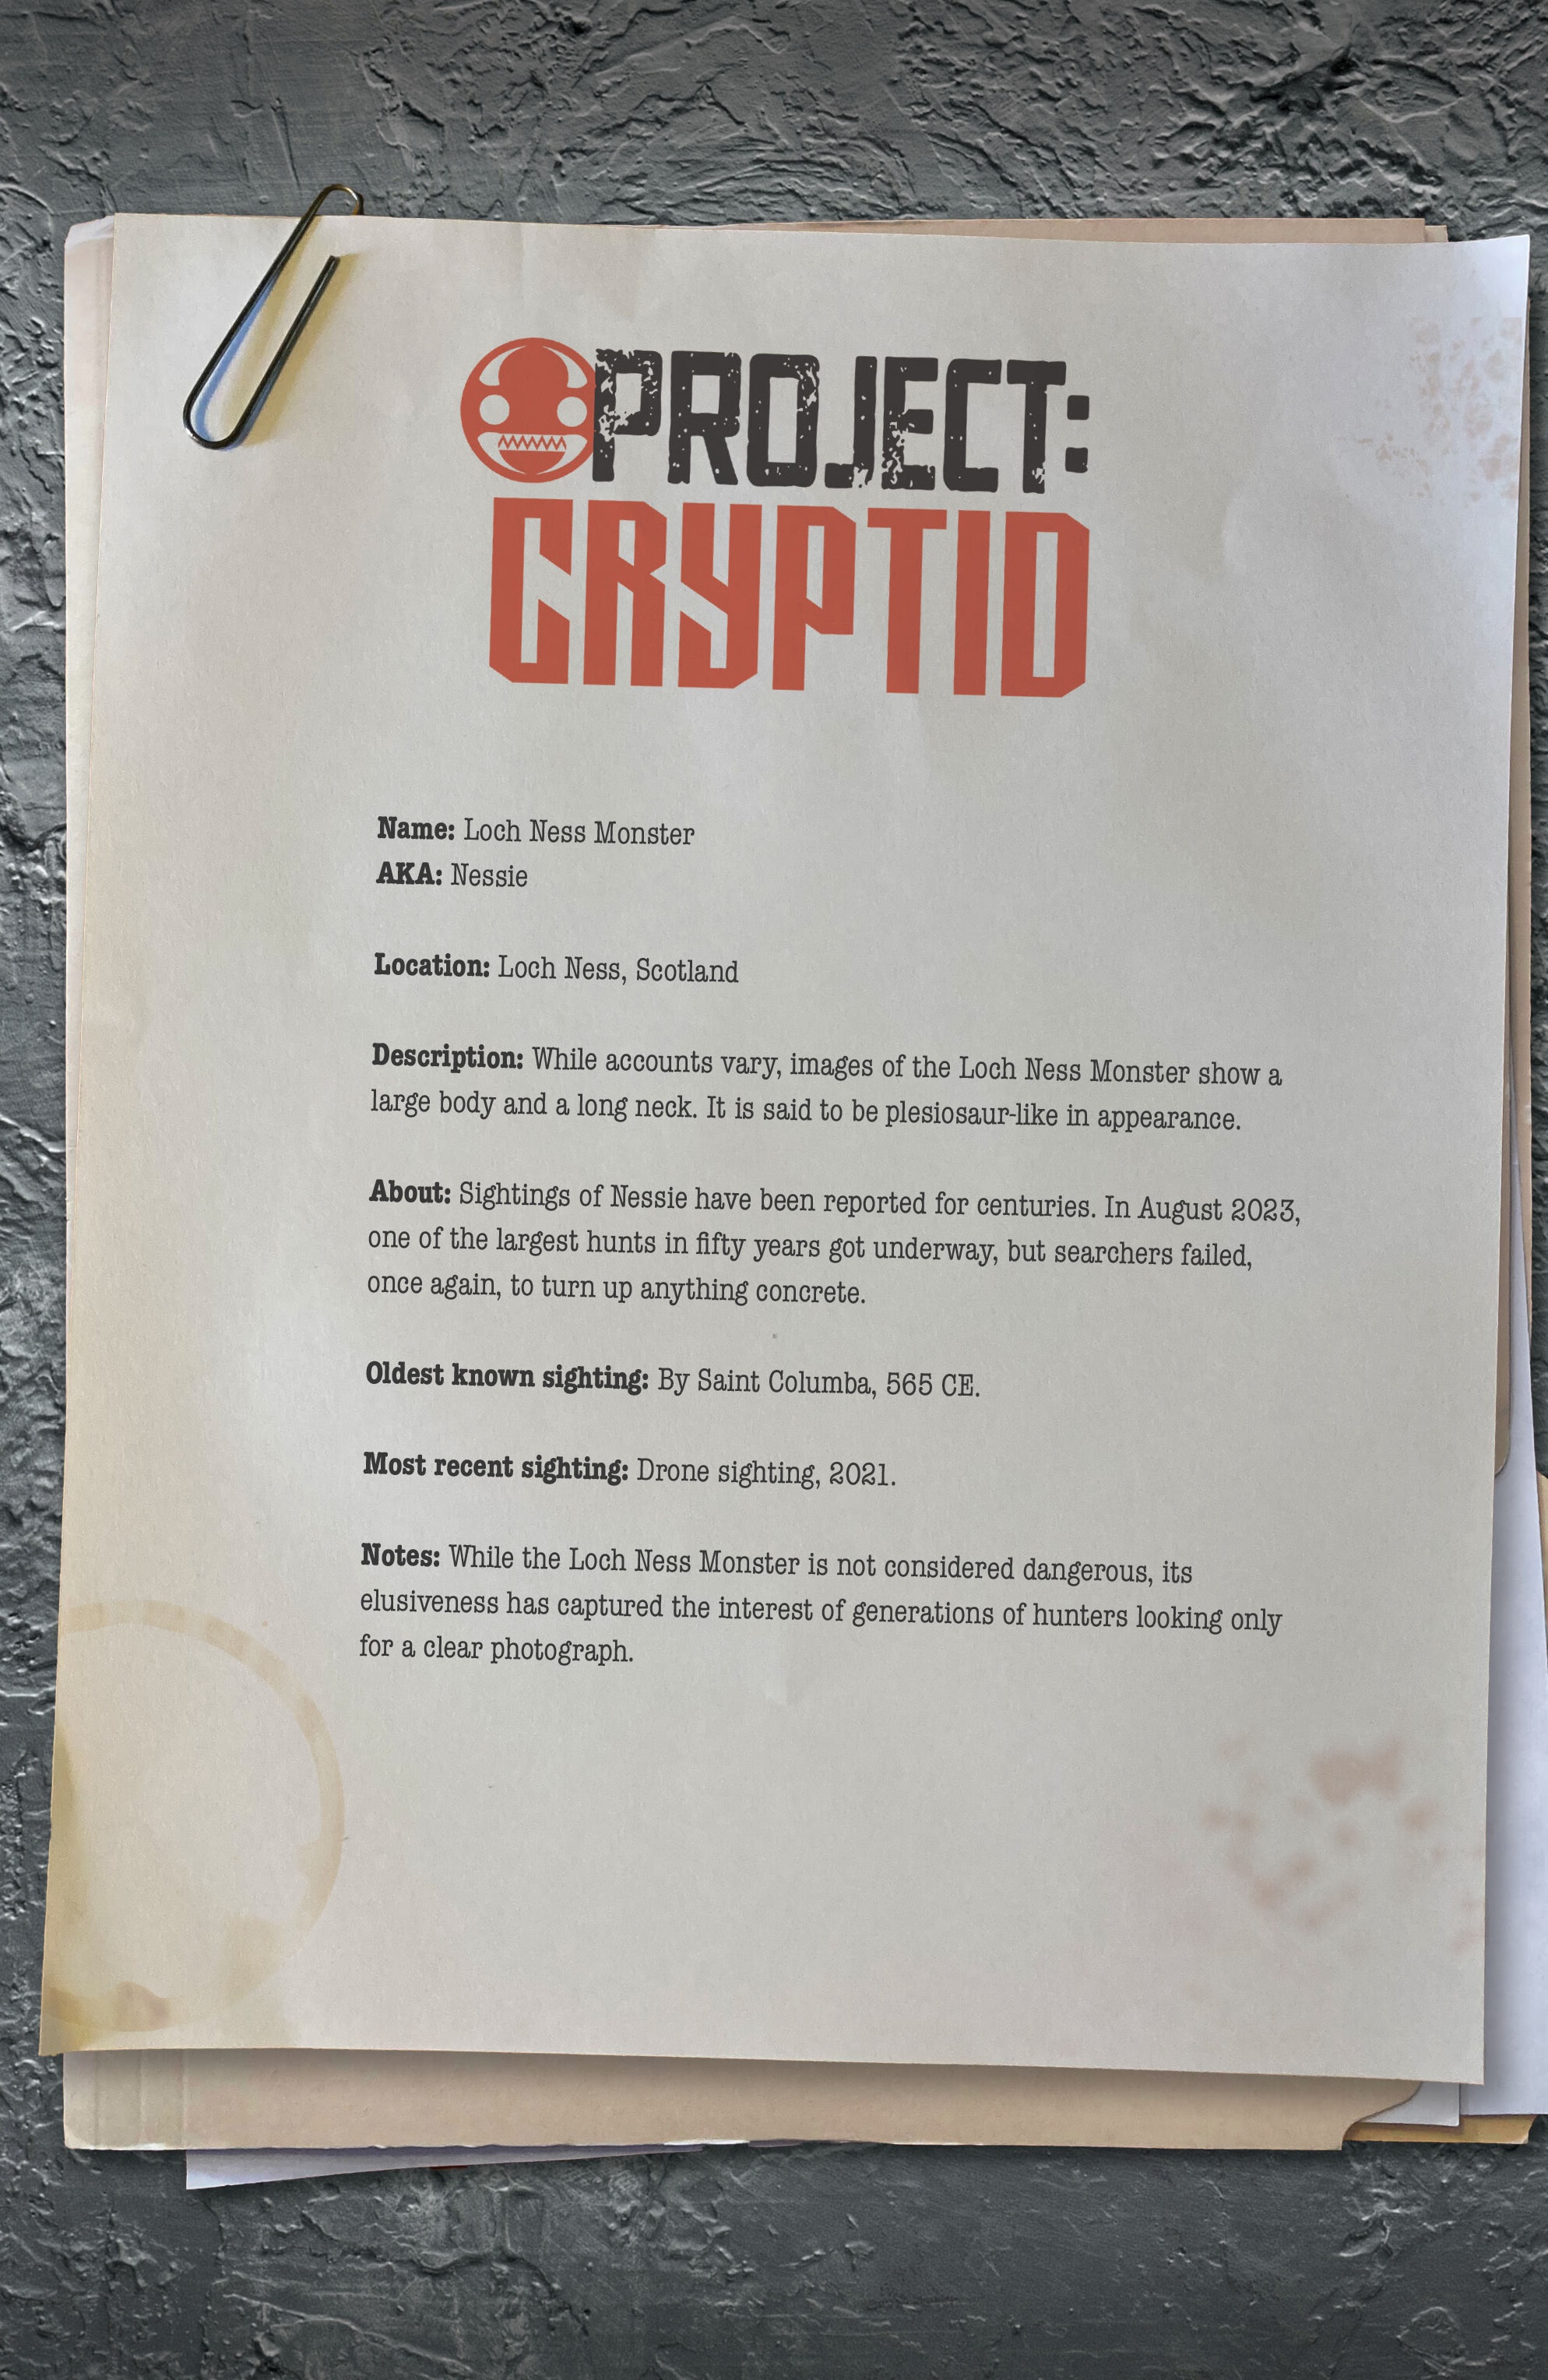 Read online Project Cryptid comic -  Issue #5 - 32